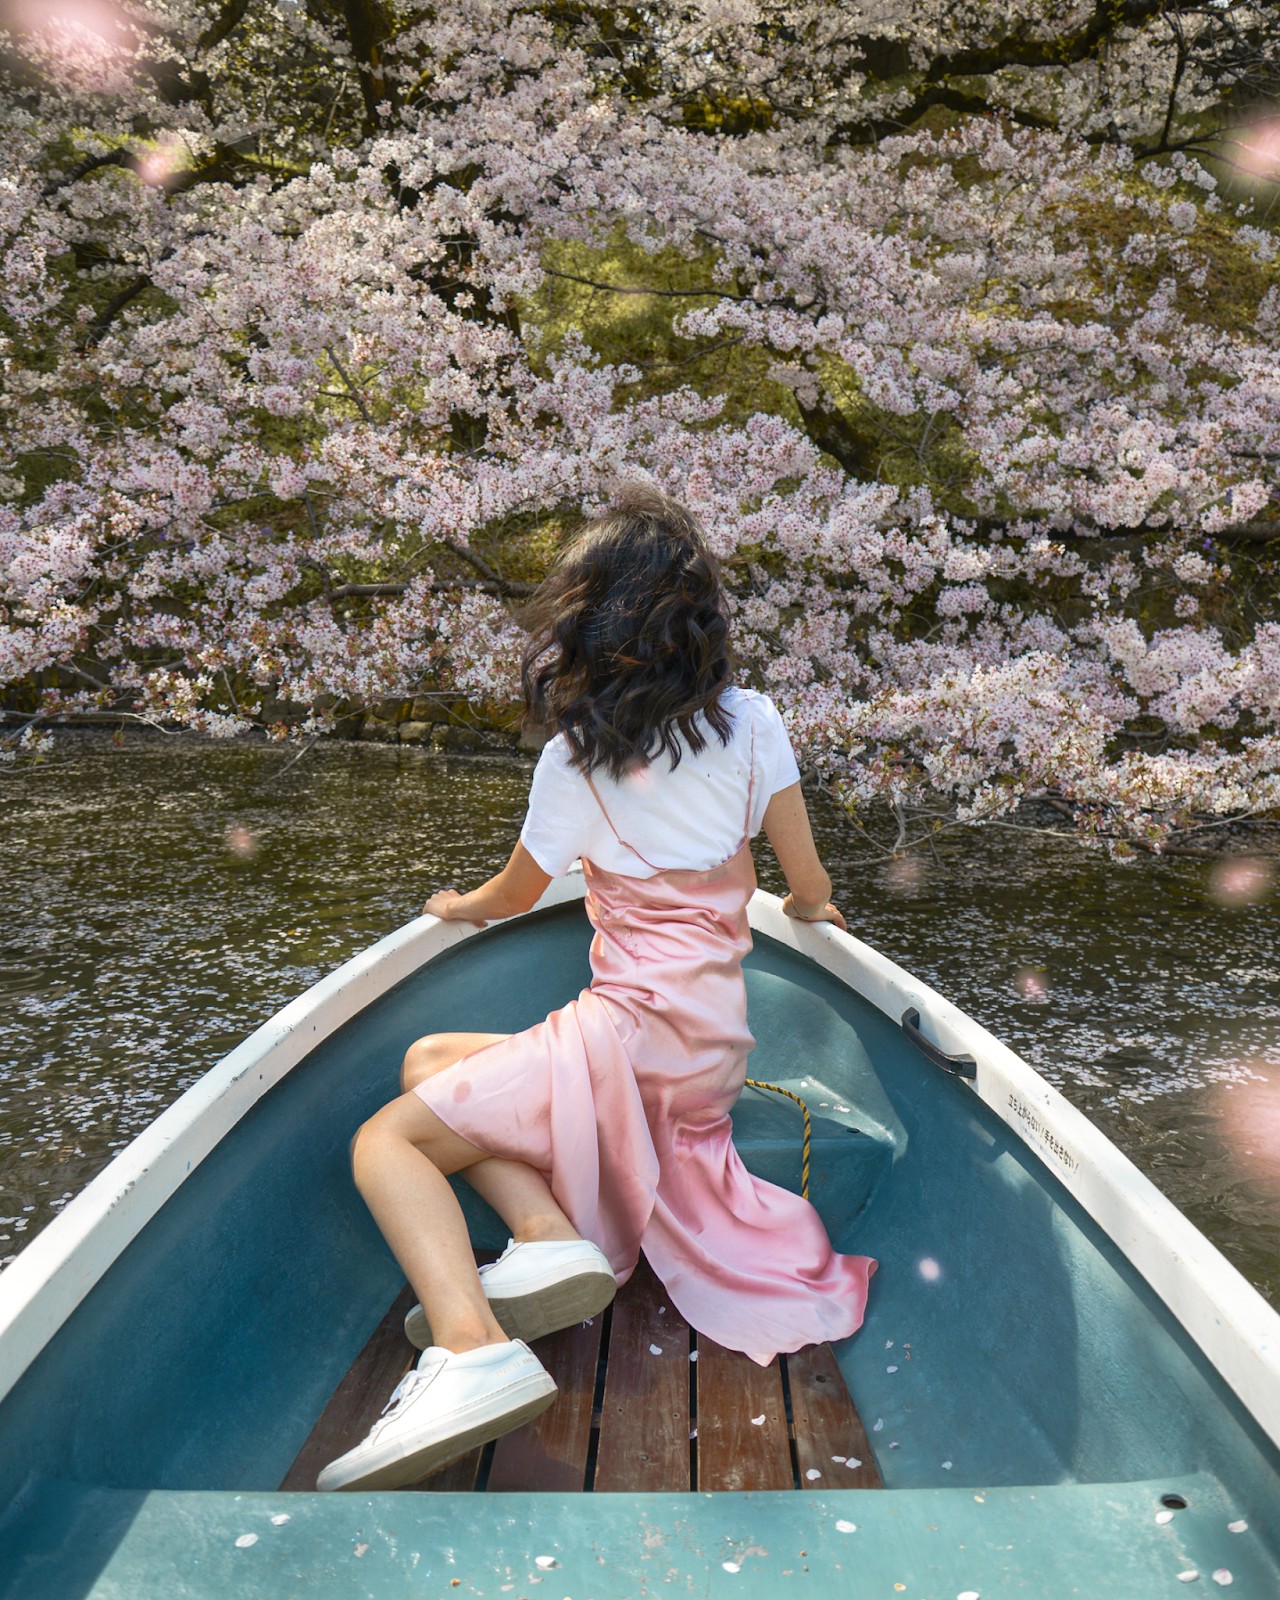 Best cherry blossom photo spot, Tokyo's Not So Secret Cherry Blossoms Spots That You Might Not Know Of - Style and Travel Blogger Van Le (FOREVERVANNY.com)